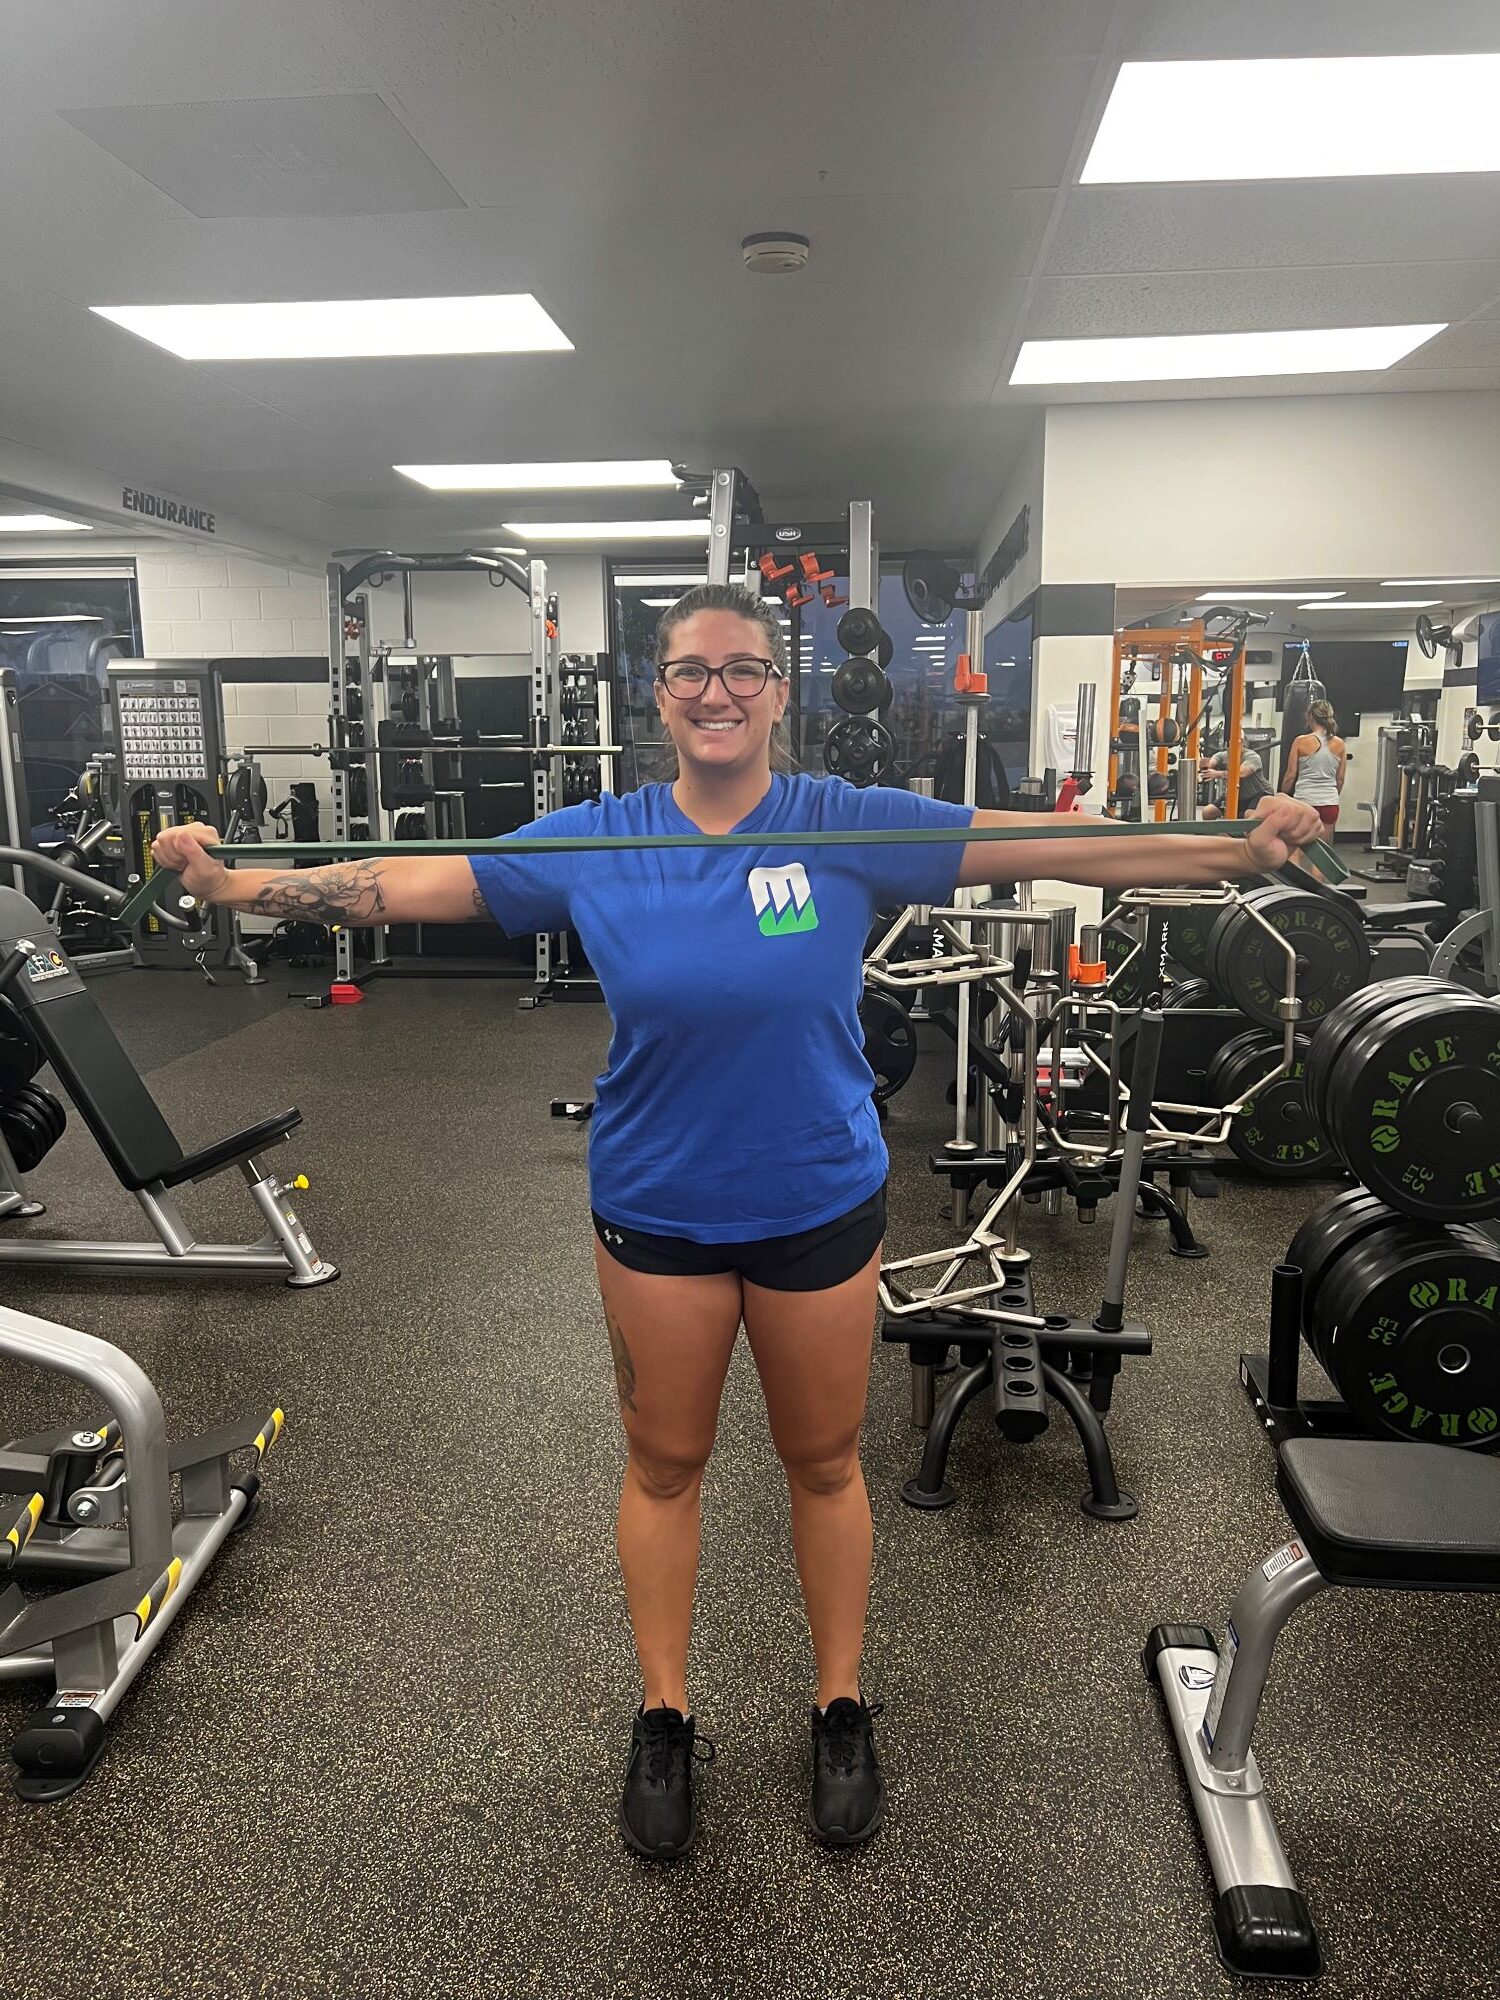 Standing woman in blue t-shirt and black shorts smiling and working out with a resistance band at AFAC gym